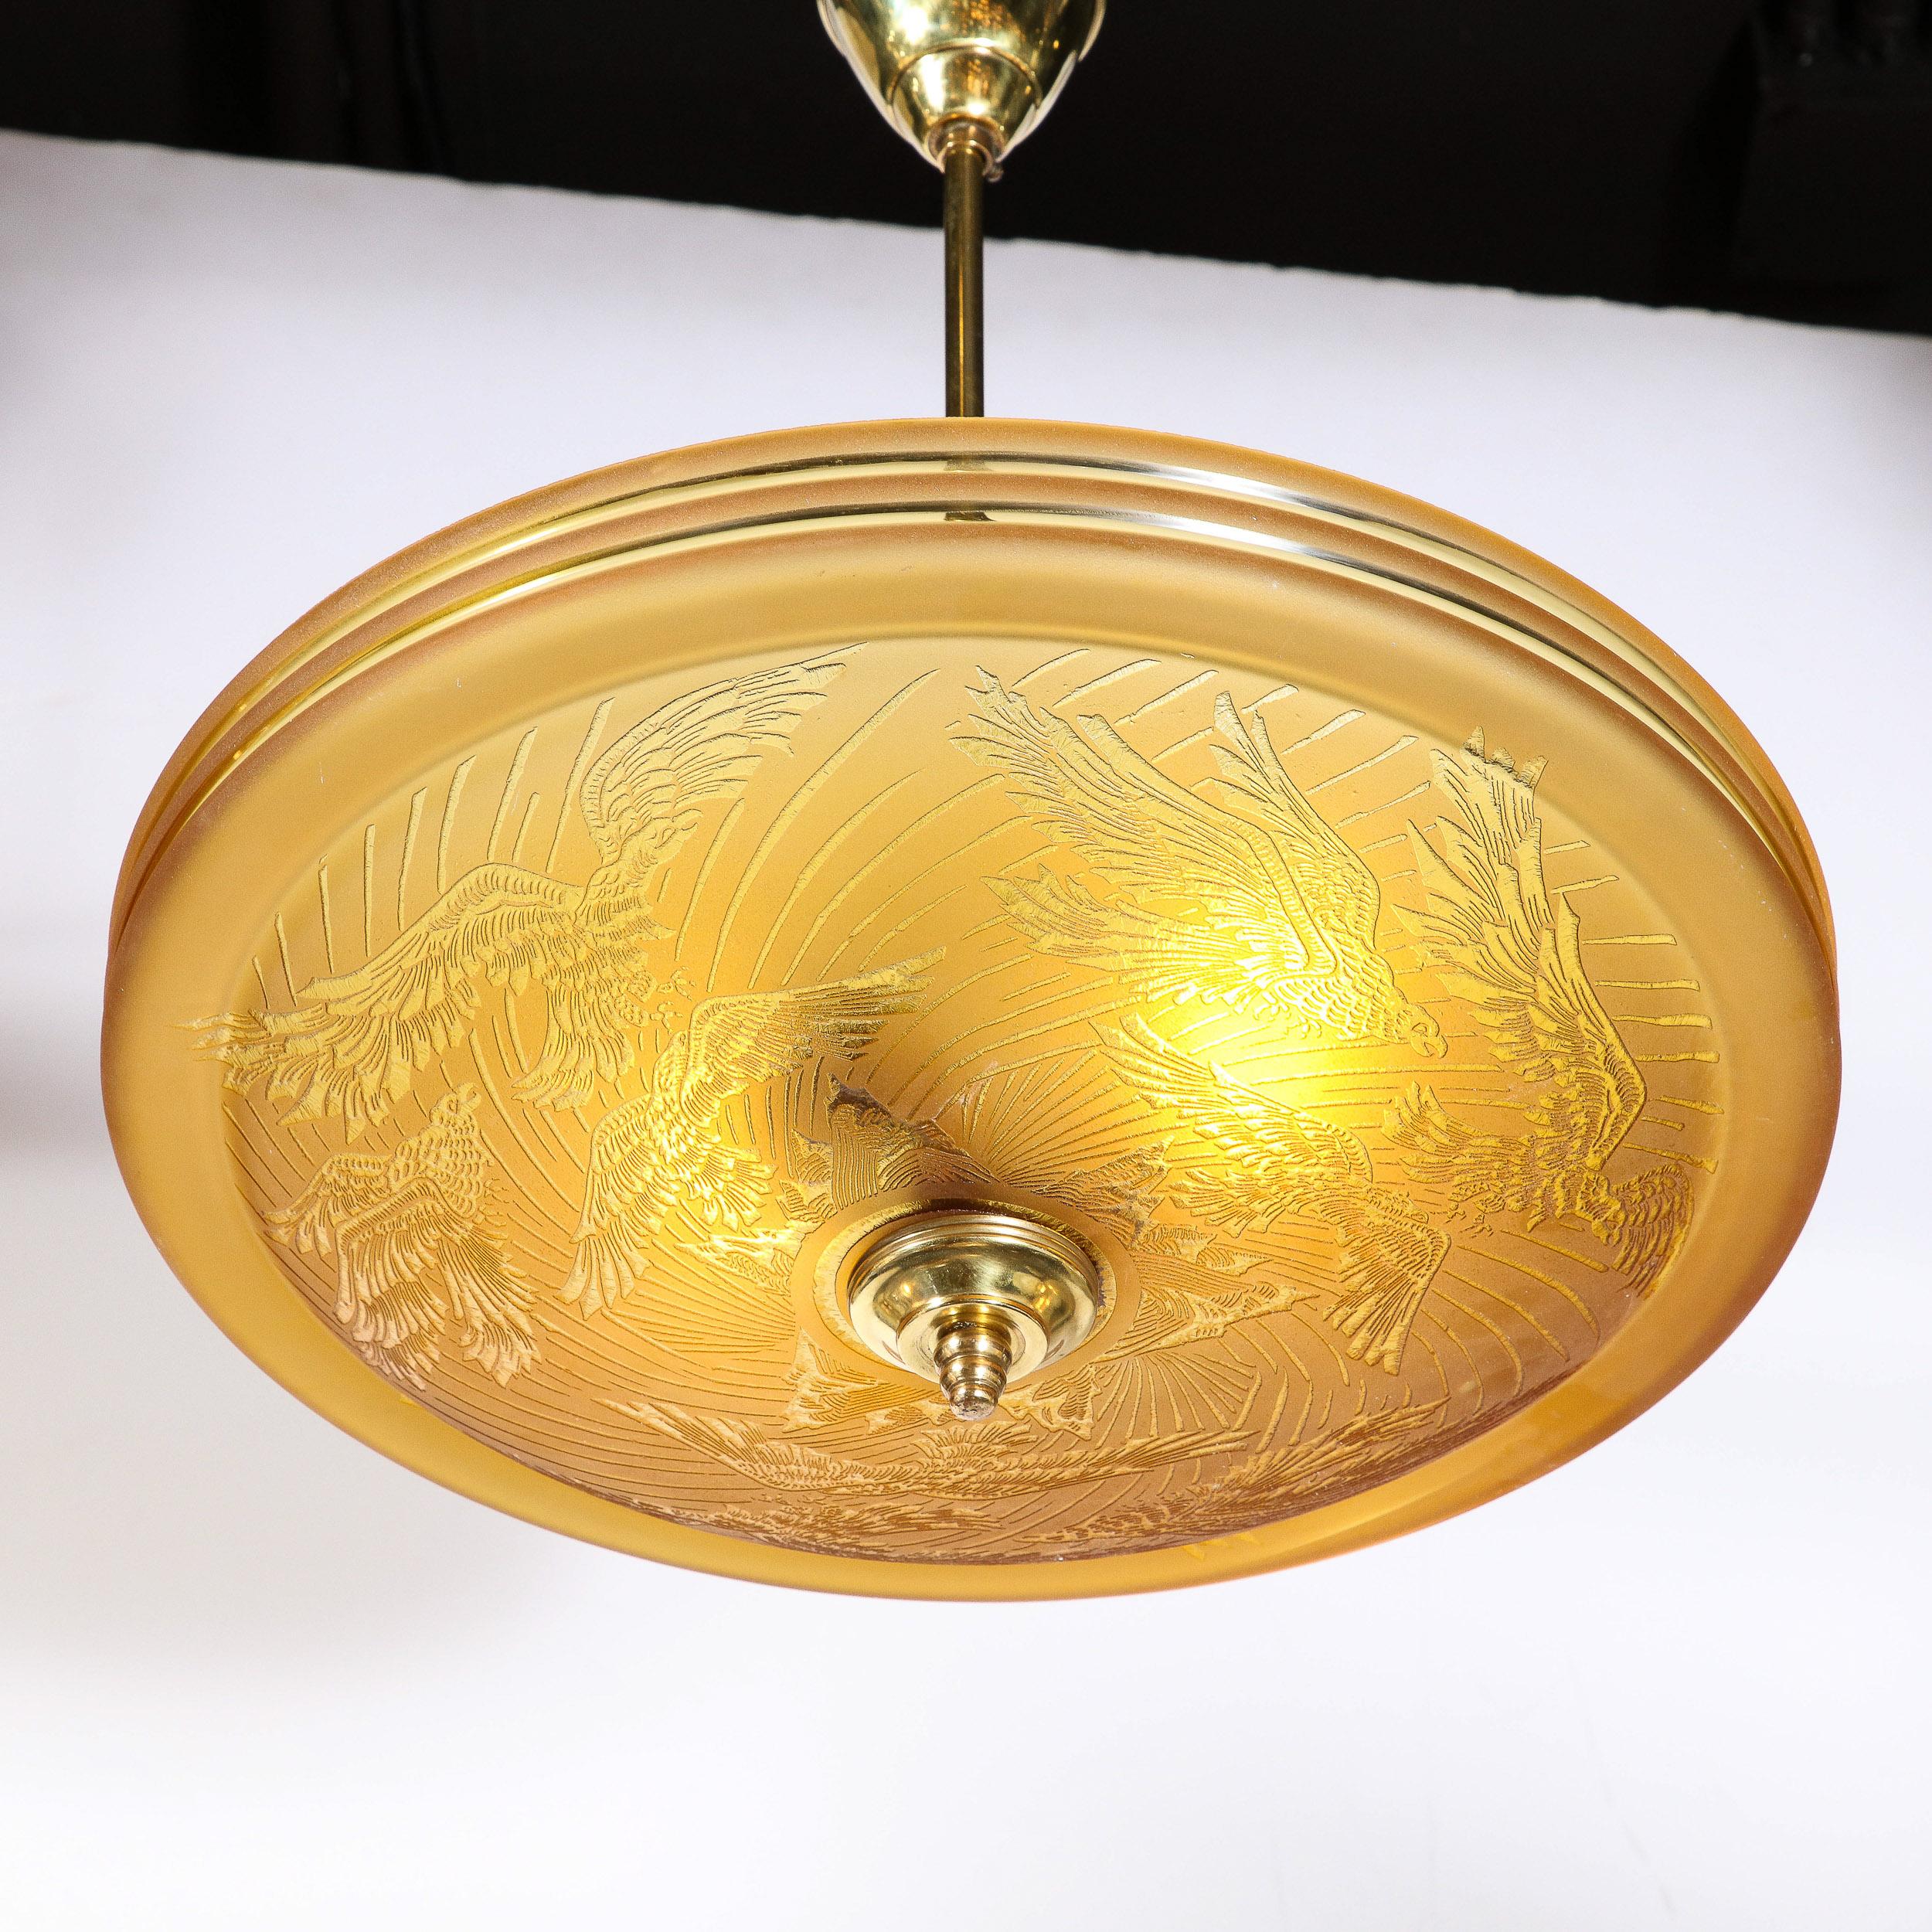 Art Deco Pendant Chandelier in Amber with Acid Etched  Motif by Deveau 5